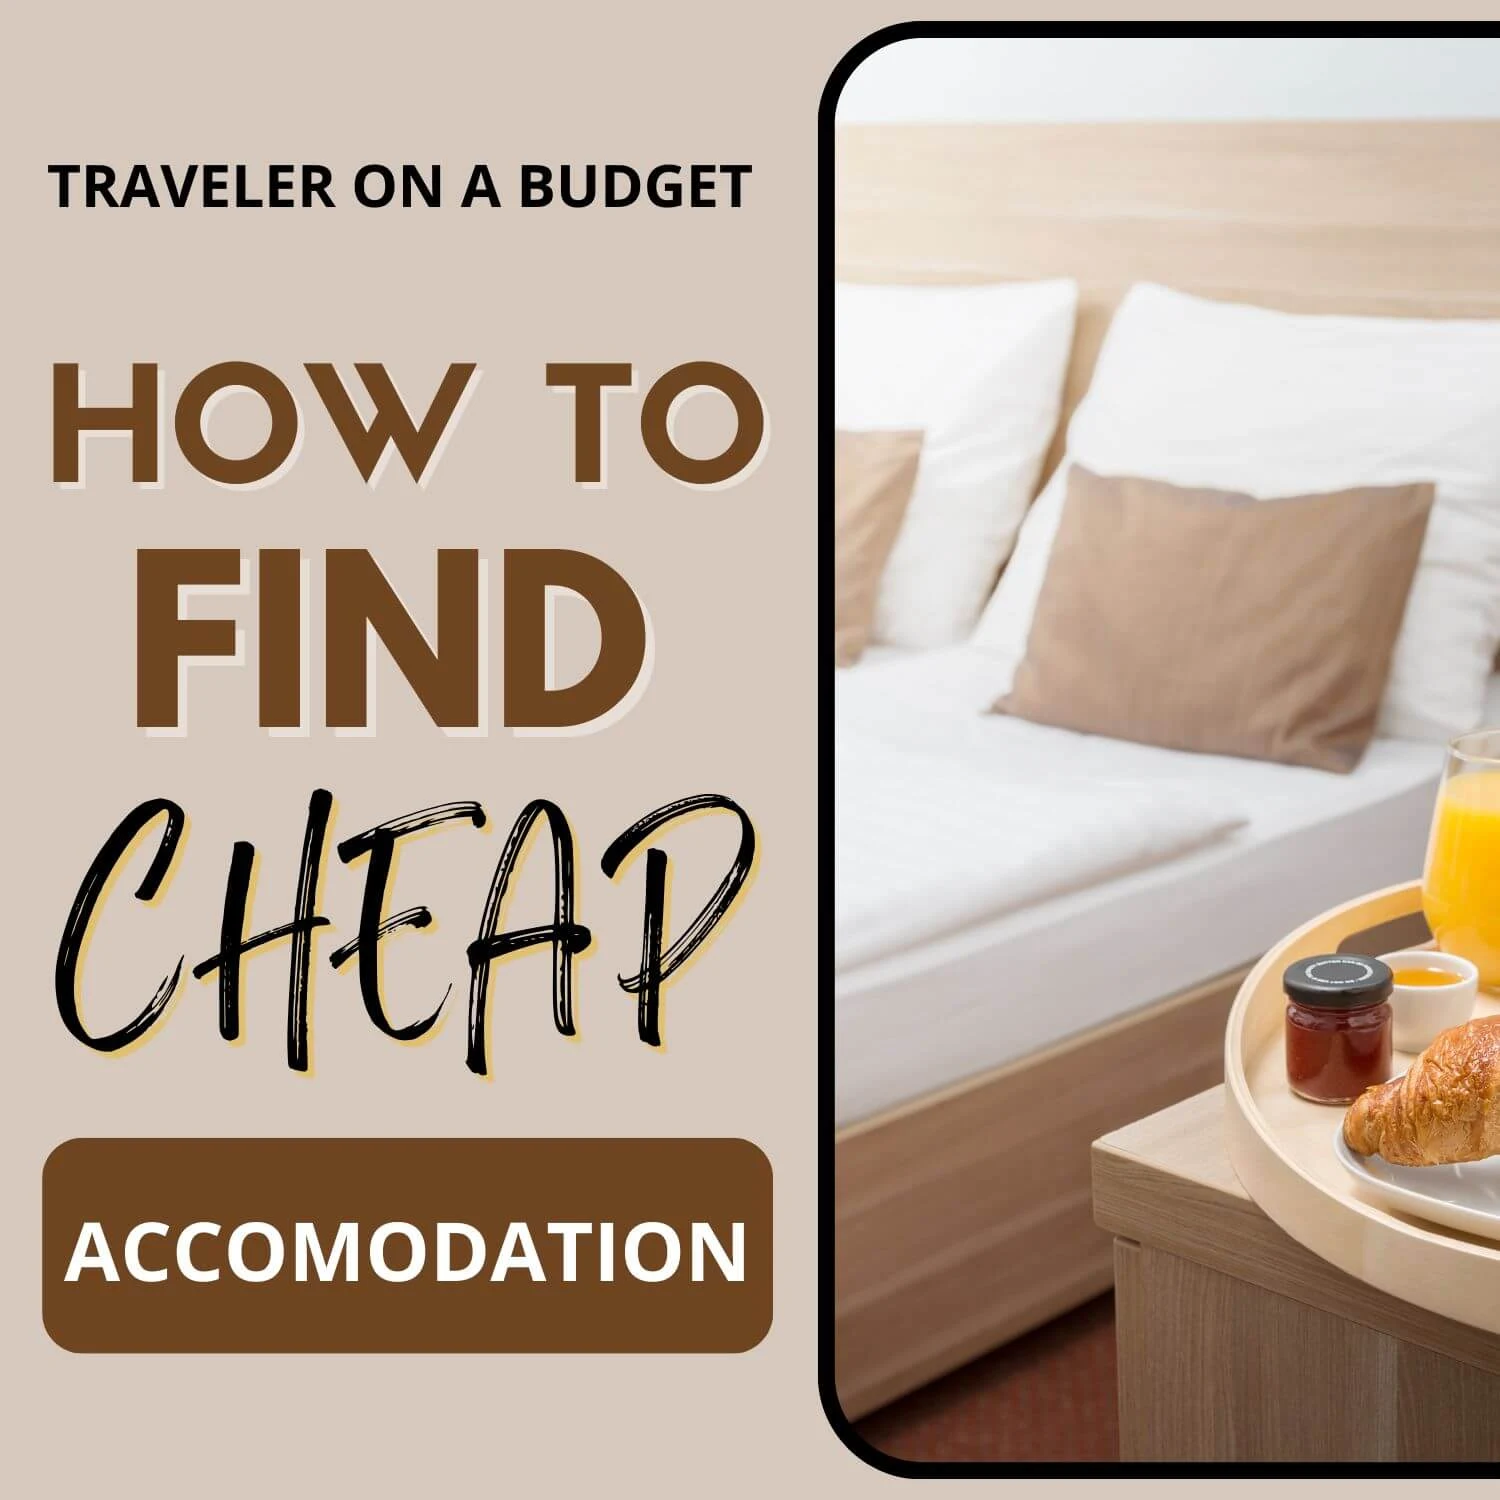 How To Find Cheap Accommodation On A Budget